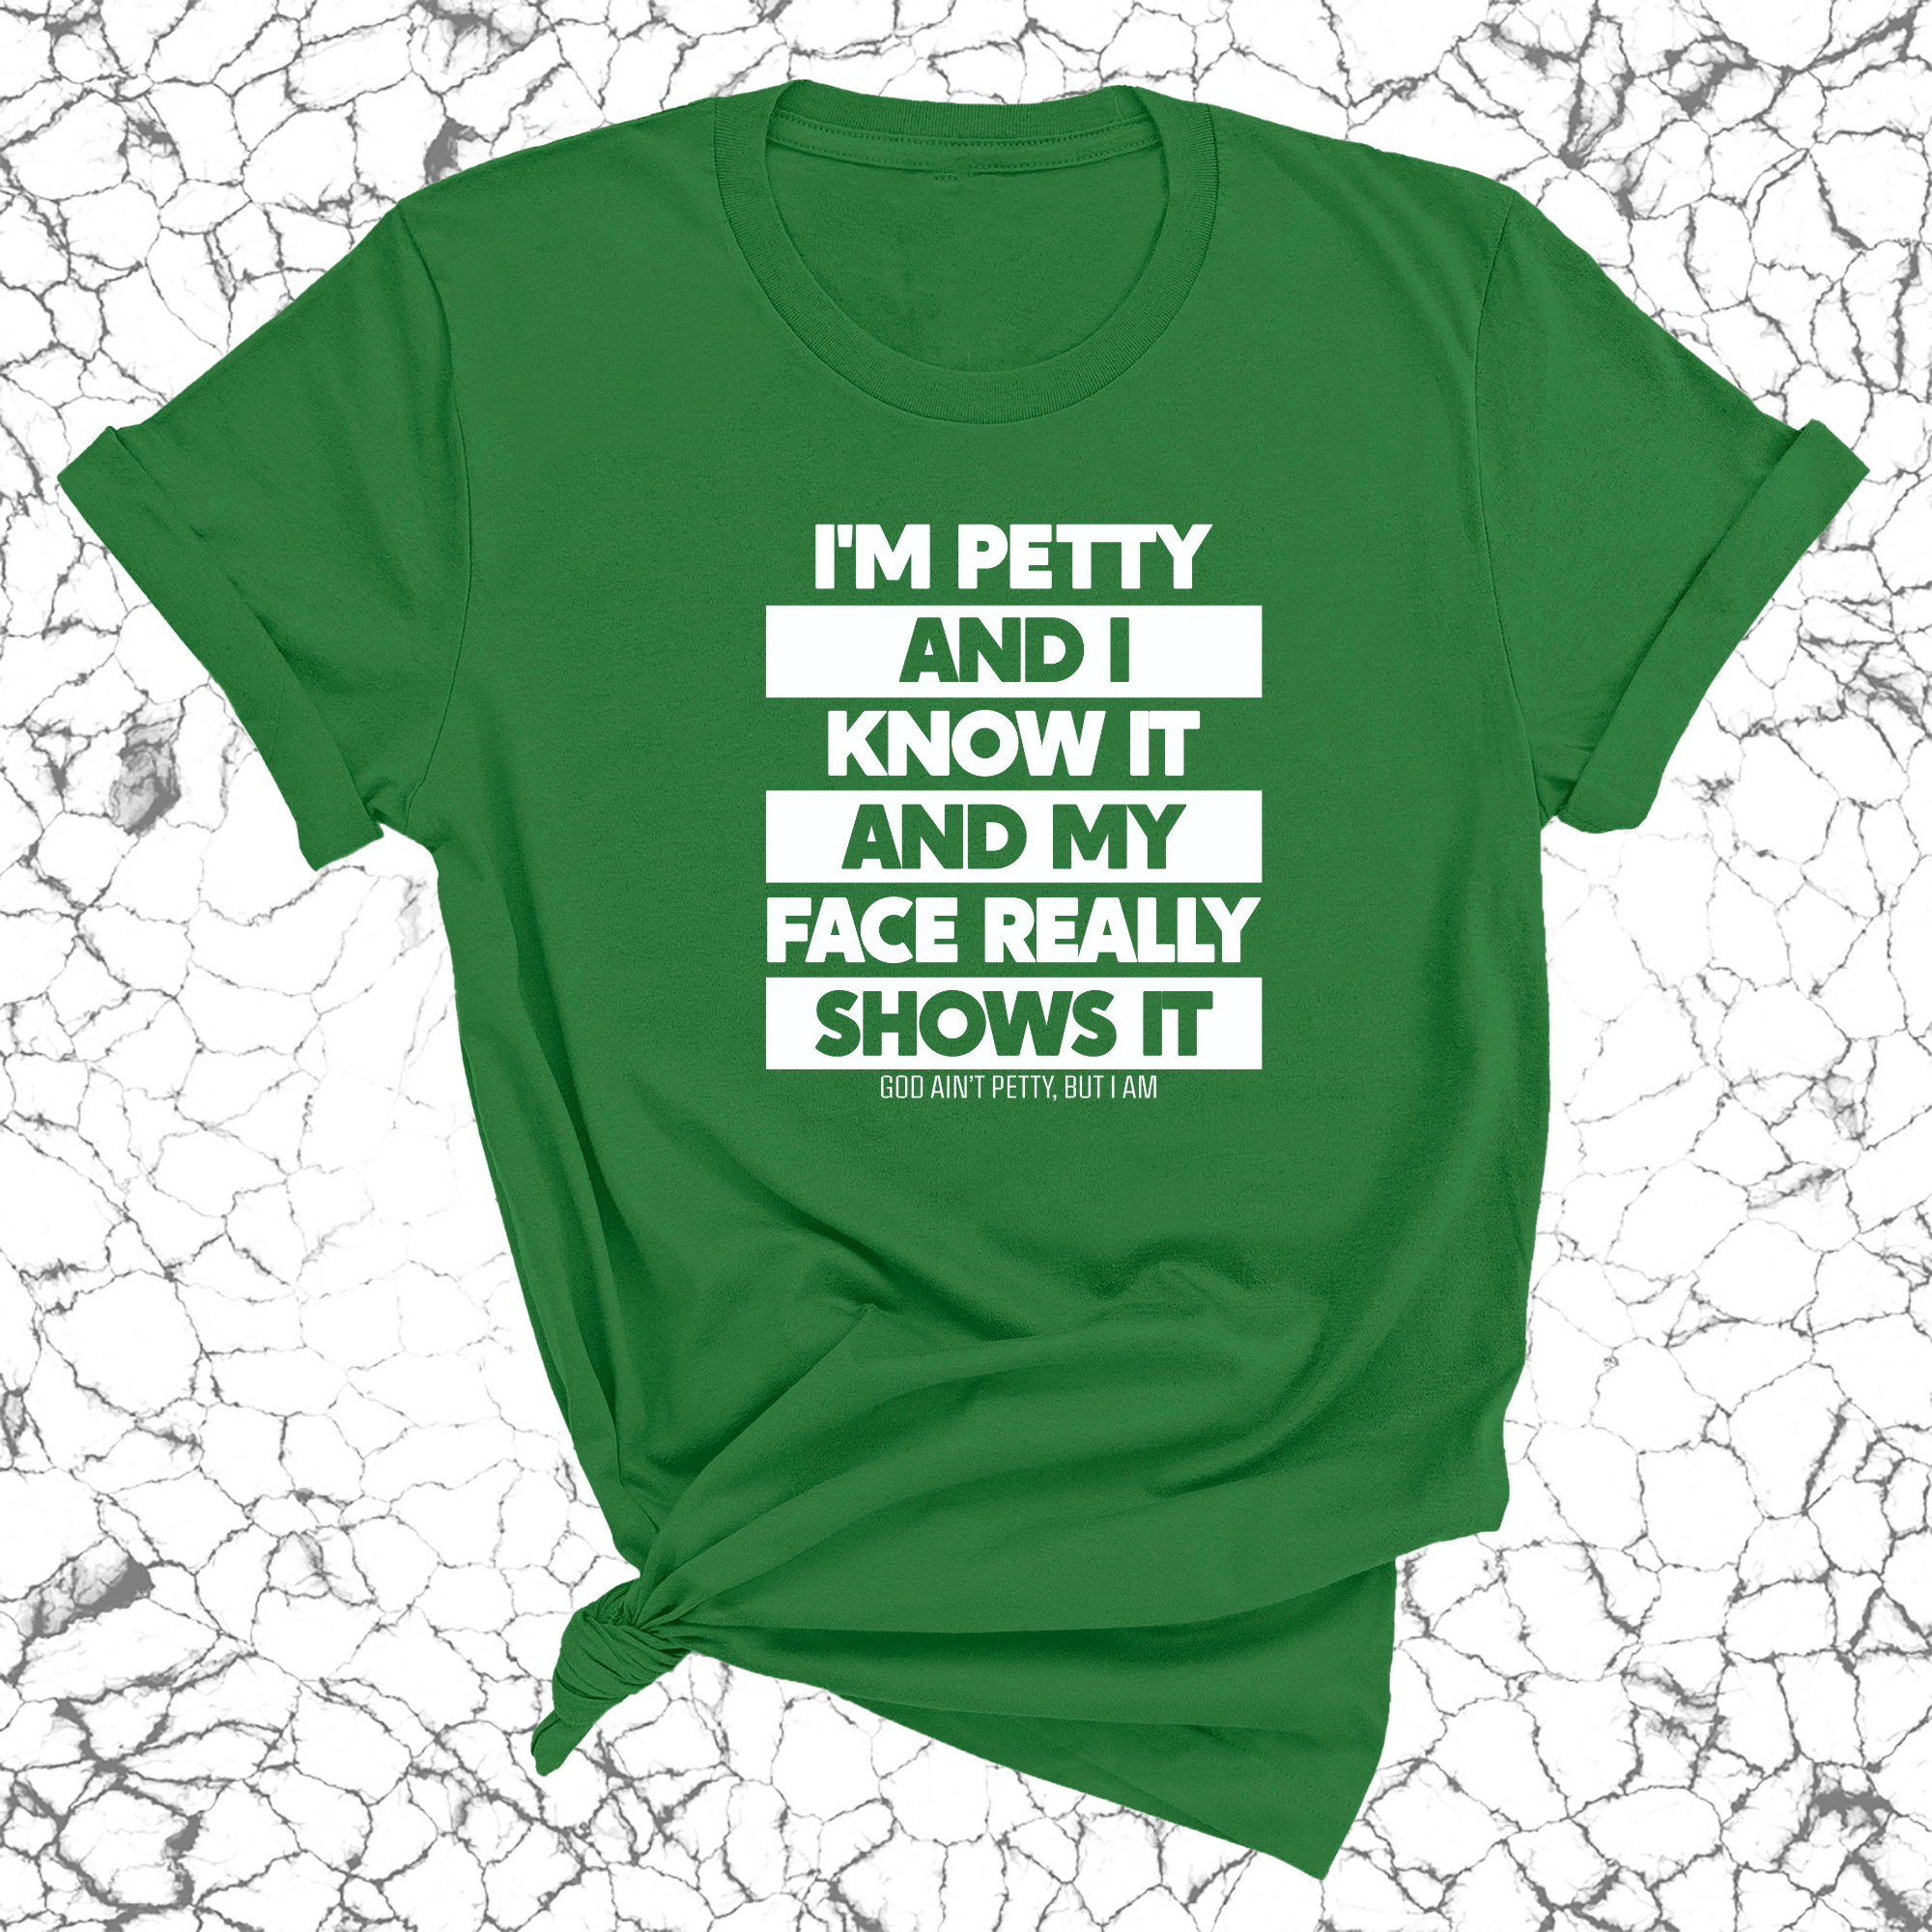 I'm petty and I know it and my petty face really shows it Unisex Tee-T-Shirt-The Original God Ain't Petty But I Am